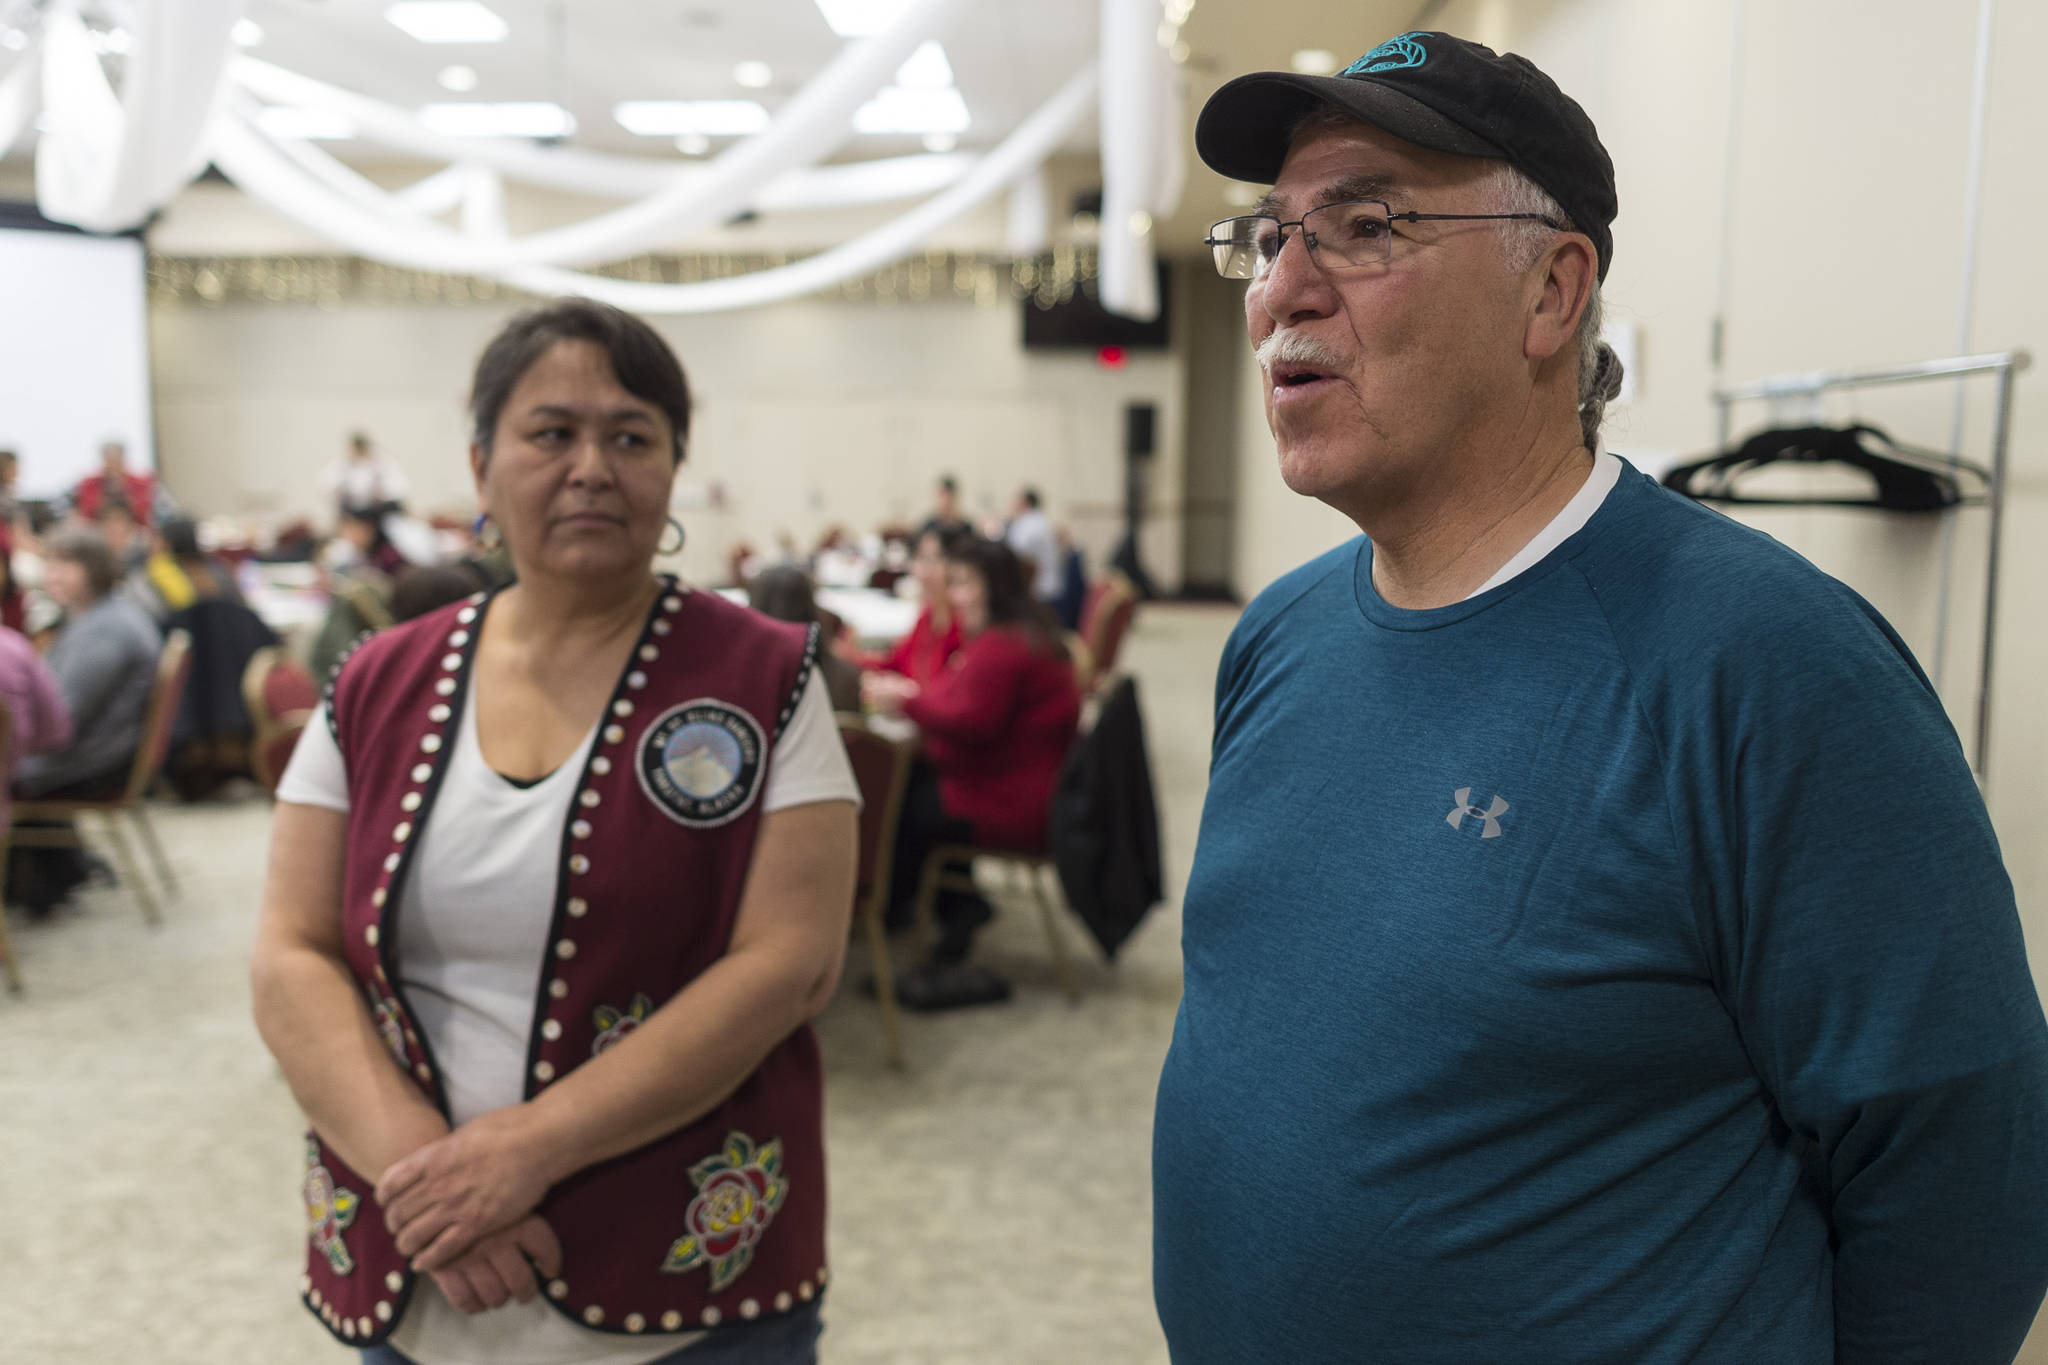 Cathy Bremner, the vice president of Yakutat Tlingit Tribe, and Larry Bemis, council member of Yakutat Tlingit Tribe, speak about the Tribal Court Roundup held at the Elizabeth Peratrovich Hall on Friday, Dec. 14, 2018. (Michael Penn | Juneau Empire)